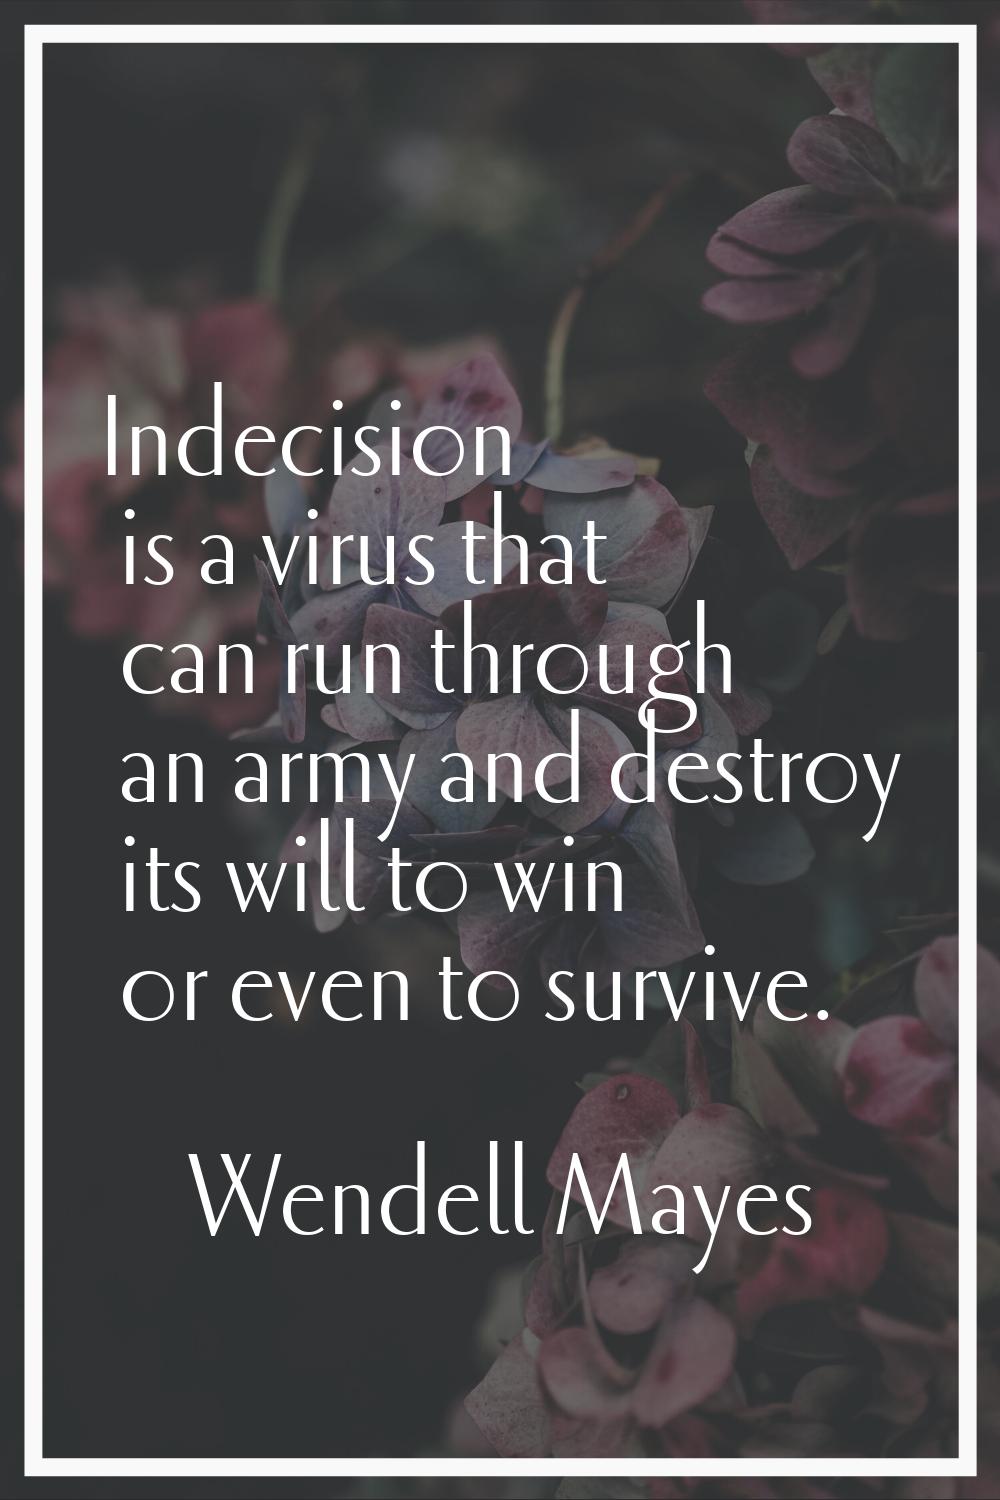 Indecision is a virus that can run through an army and destroy its will to win or even to survive.